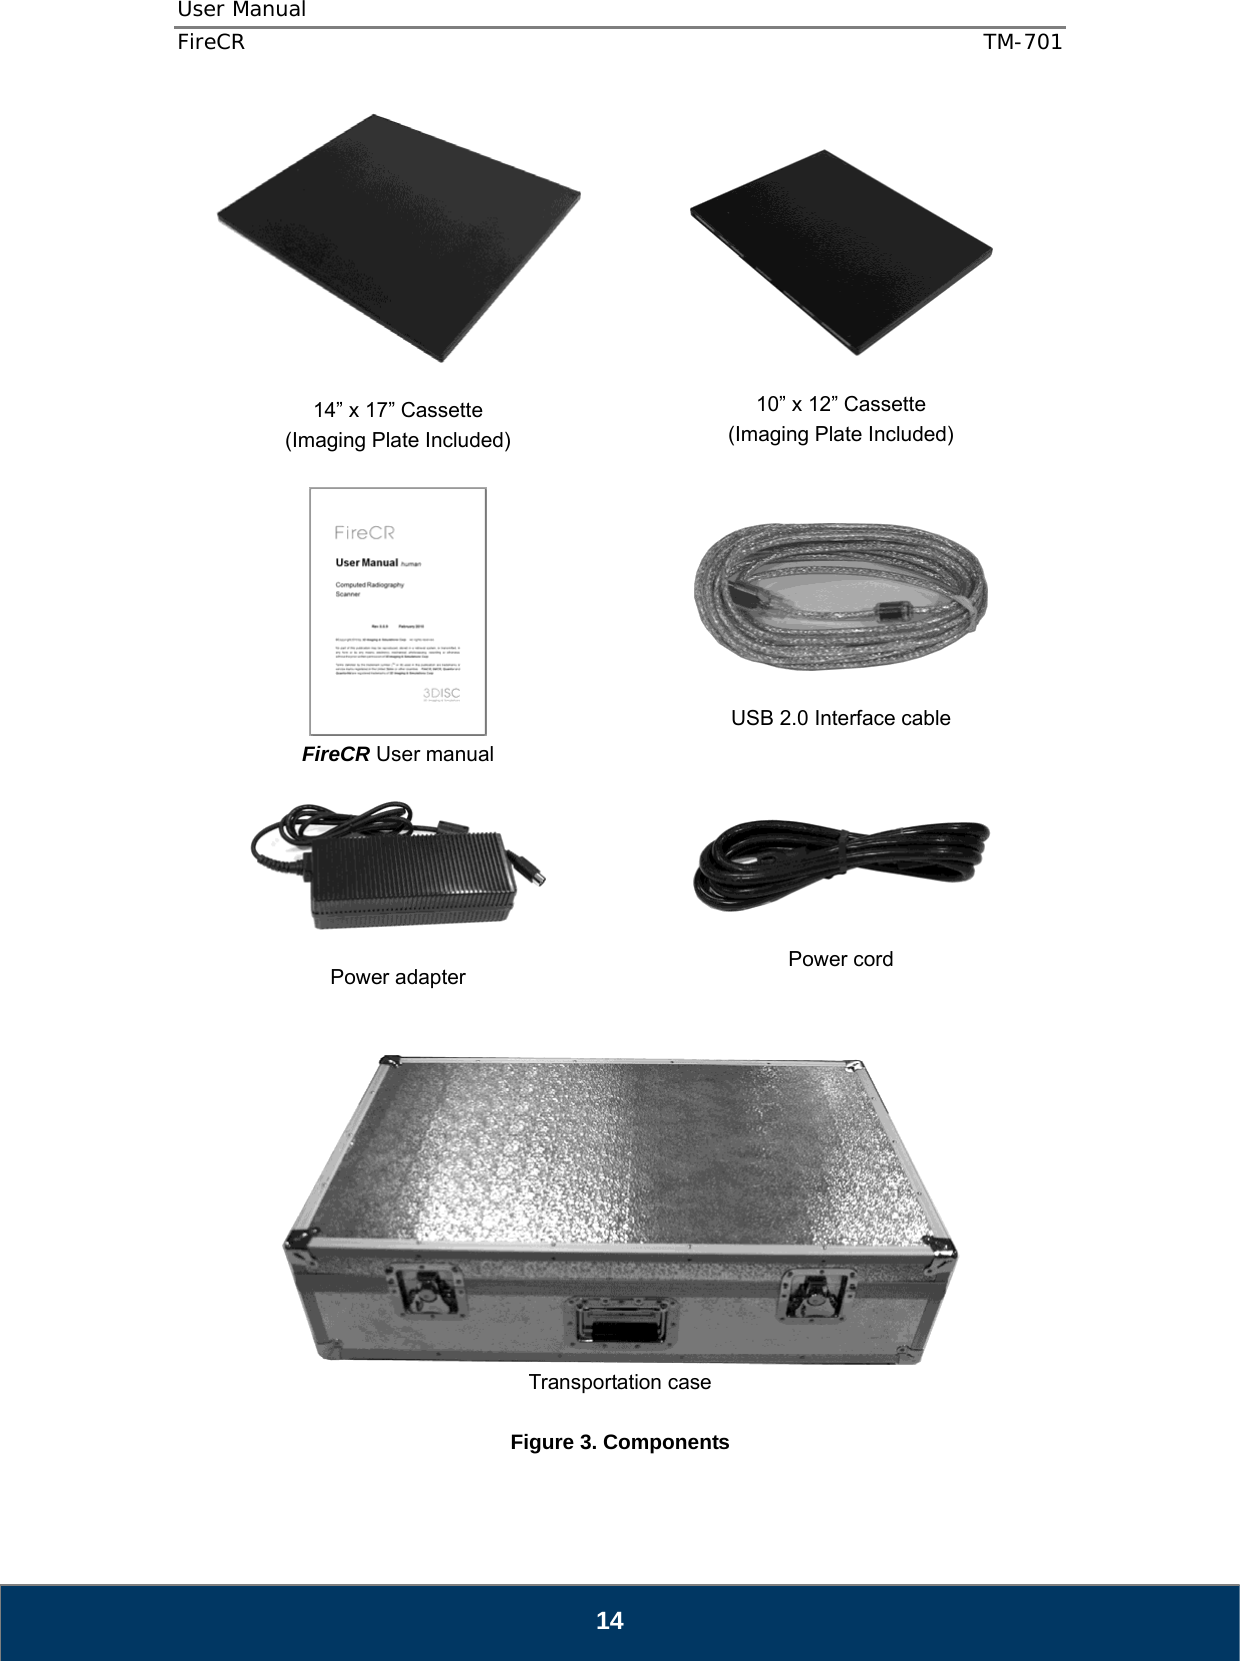 User Manual  FireCR  TM-701   14   14” x 17” Cassette (Imaging Plate Included)    10” x 12” Cassette (Imaging Plate Included)   FireCR User manual     USB 2.0 Interface cable     Power adapter     Power cord    Transportation case  Figure 3. Components 